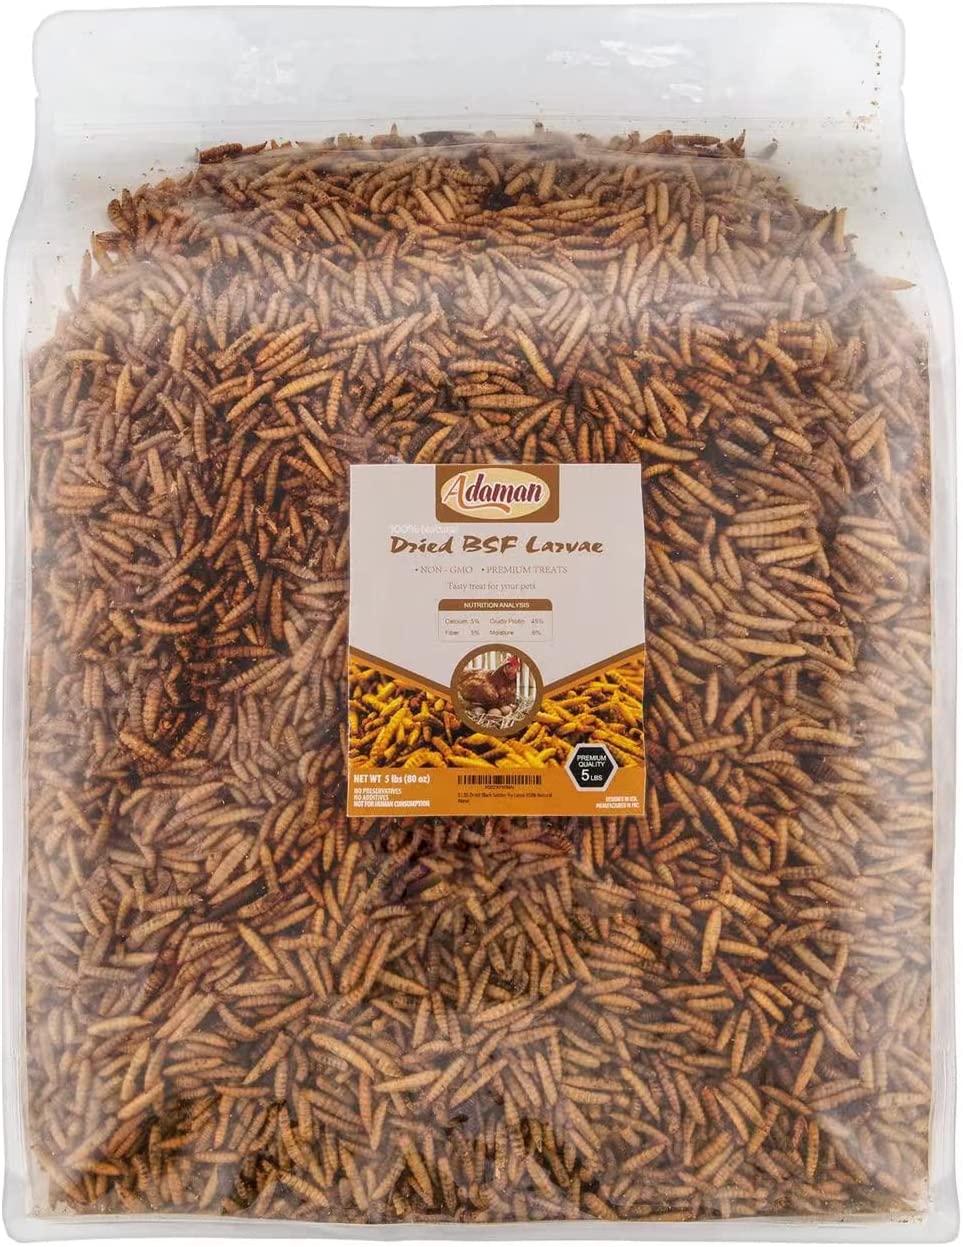 food Adaman Dried Black Soldier Fly Larvae 5 LBS-100% Natural Non-GMO BSF Larvae-More Calcium Than Dried Mealworms High-Protein Chickens Treats, Food for Birds, Ducks, Repitle, Hedgehog, Bearded Dragon